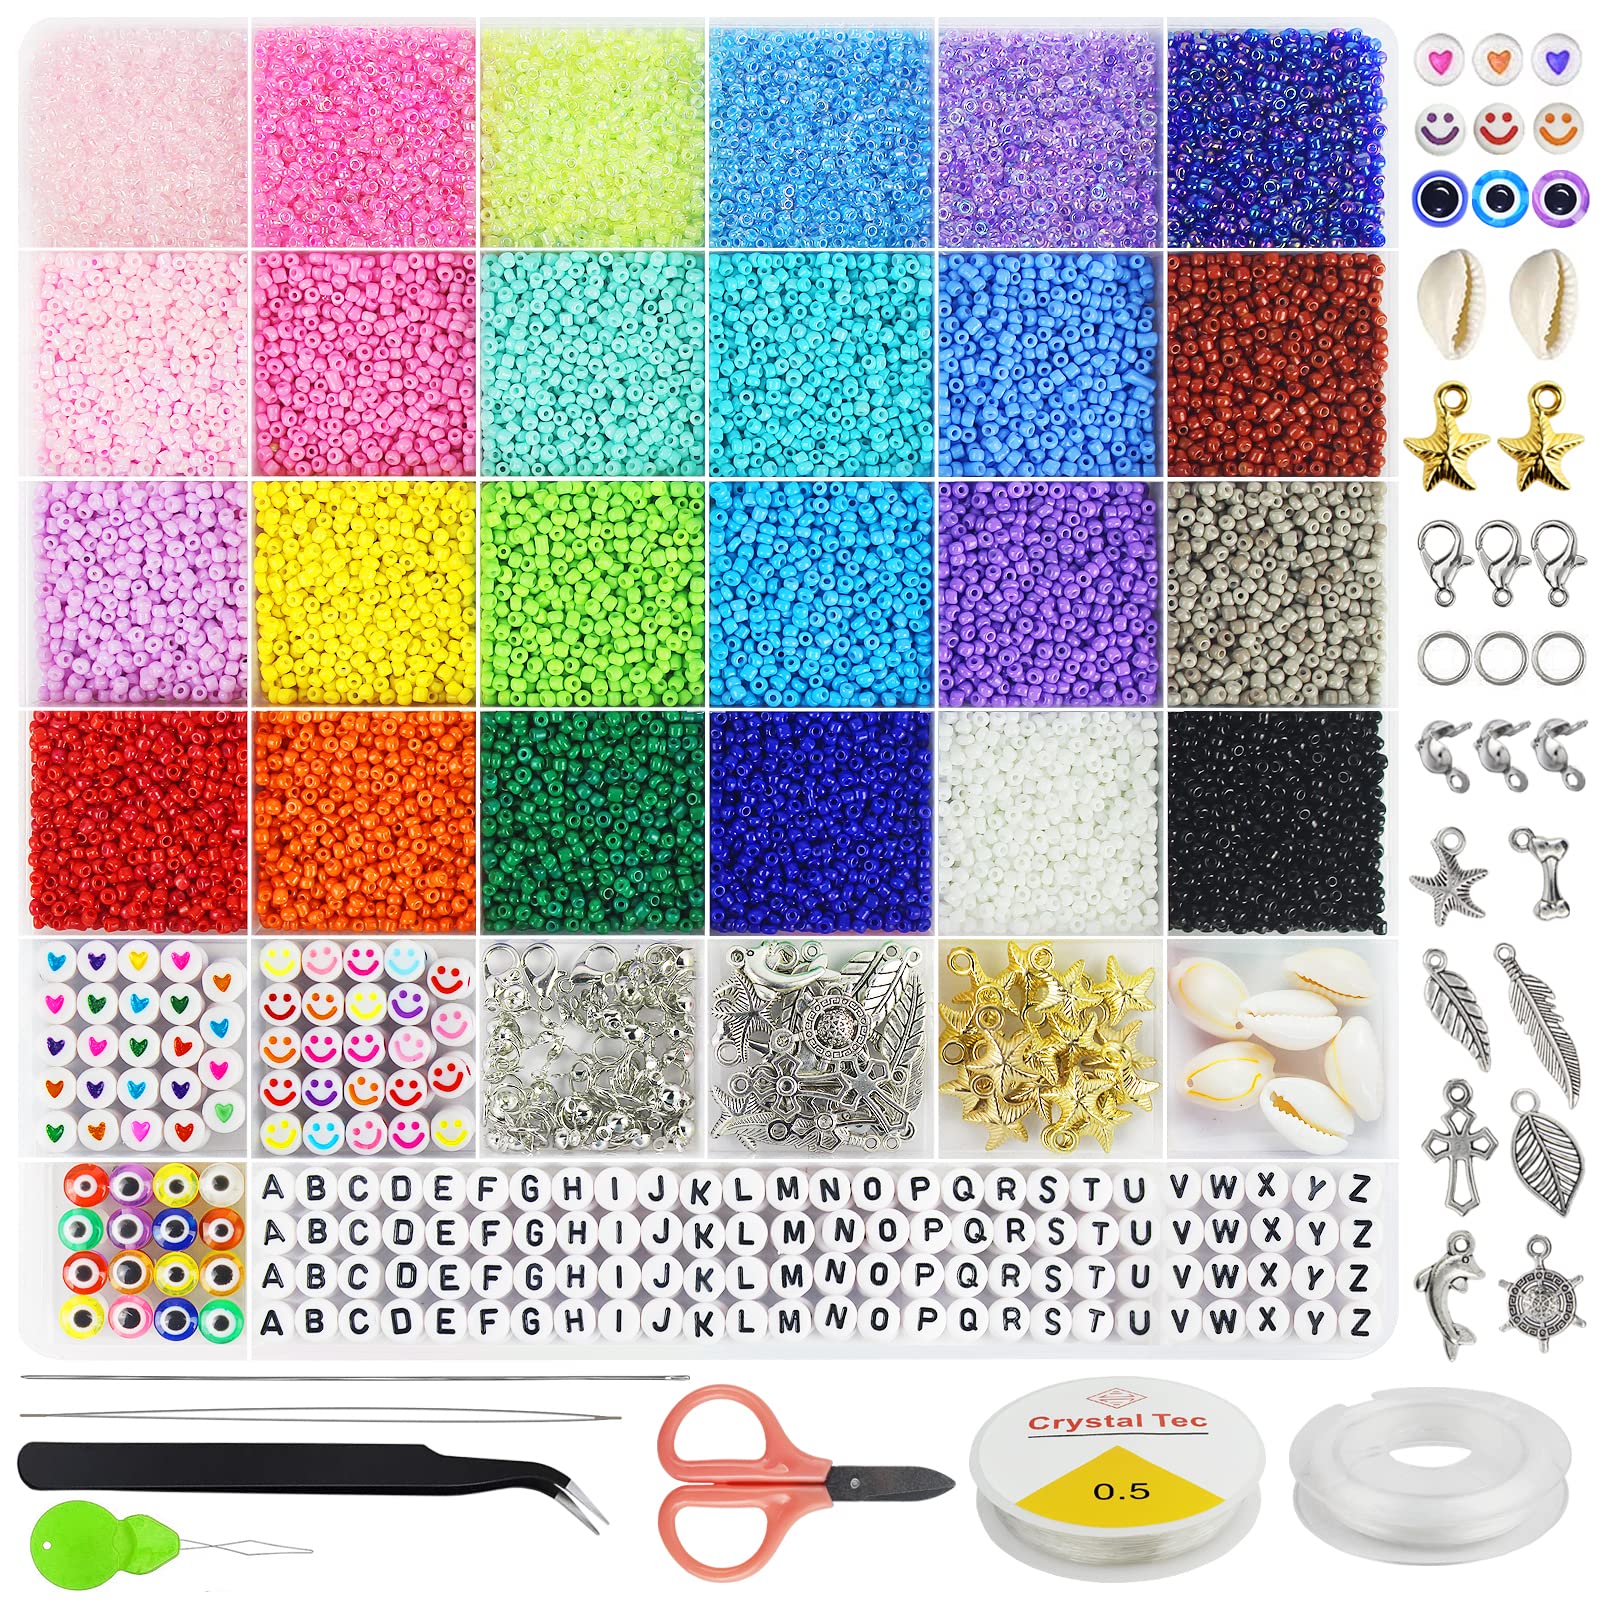 Glass Seed Beads 24 Colorful Seed Bead Kit with Letter Beads Heart Round  Beads and Beading Needles for Jewelry Bracelet Making